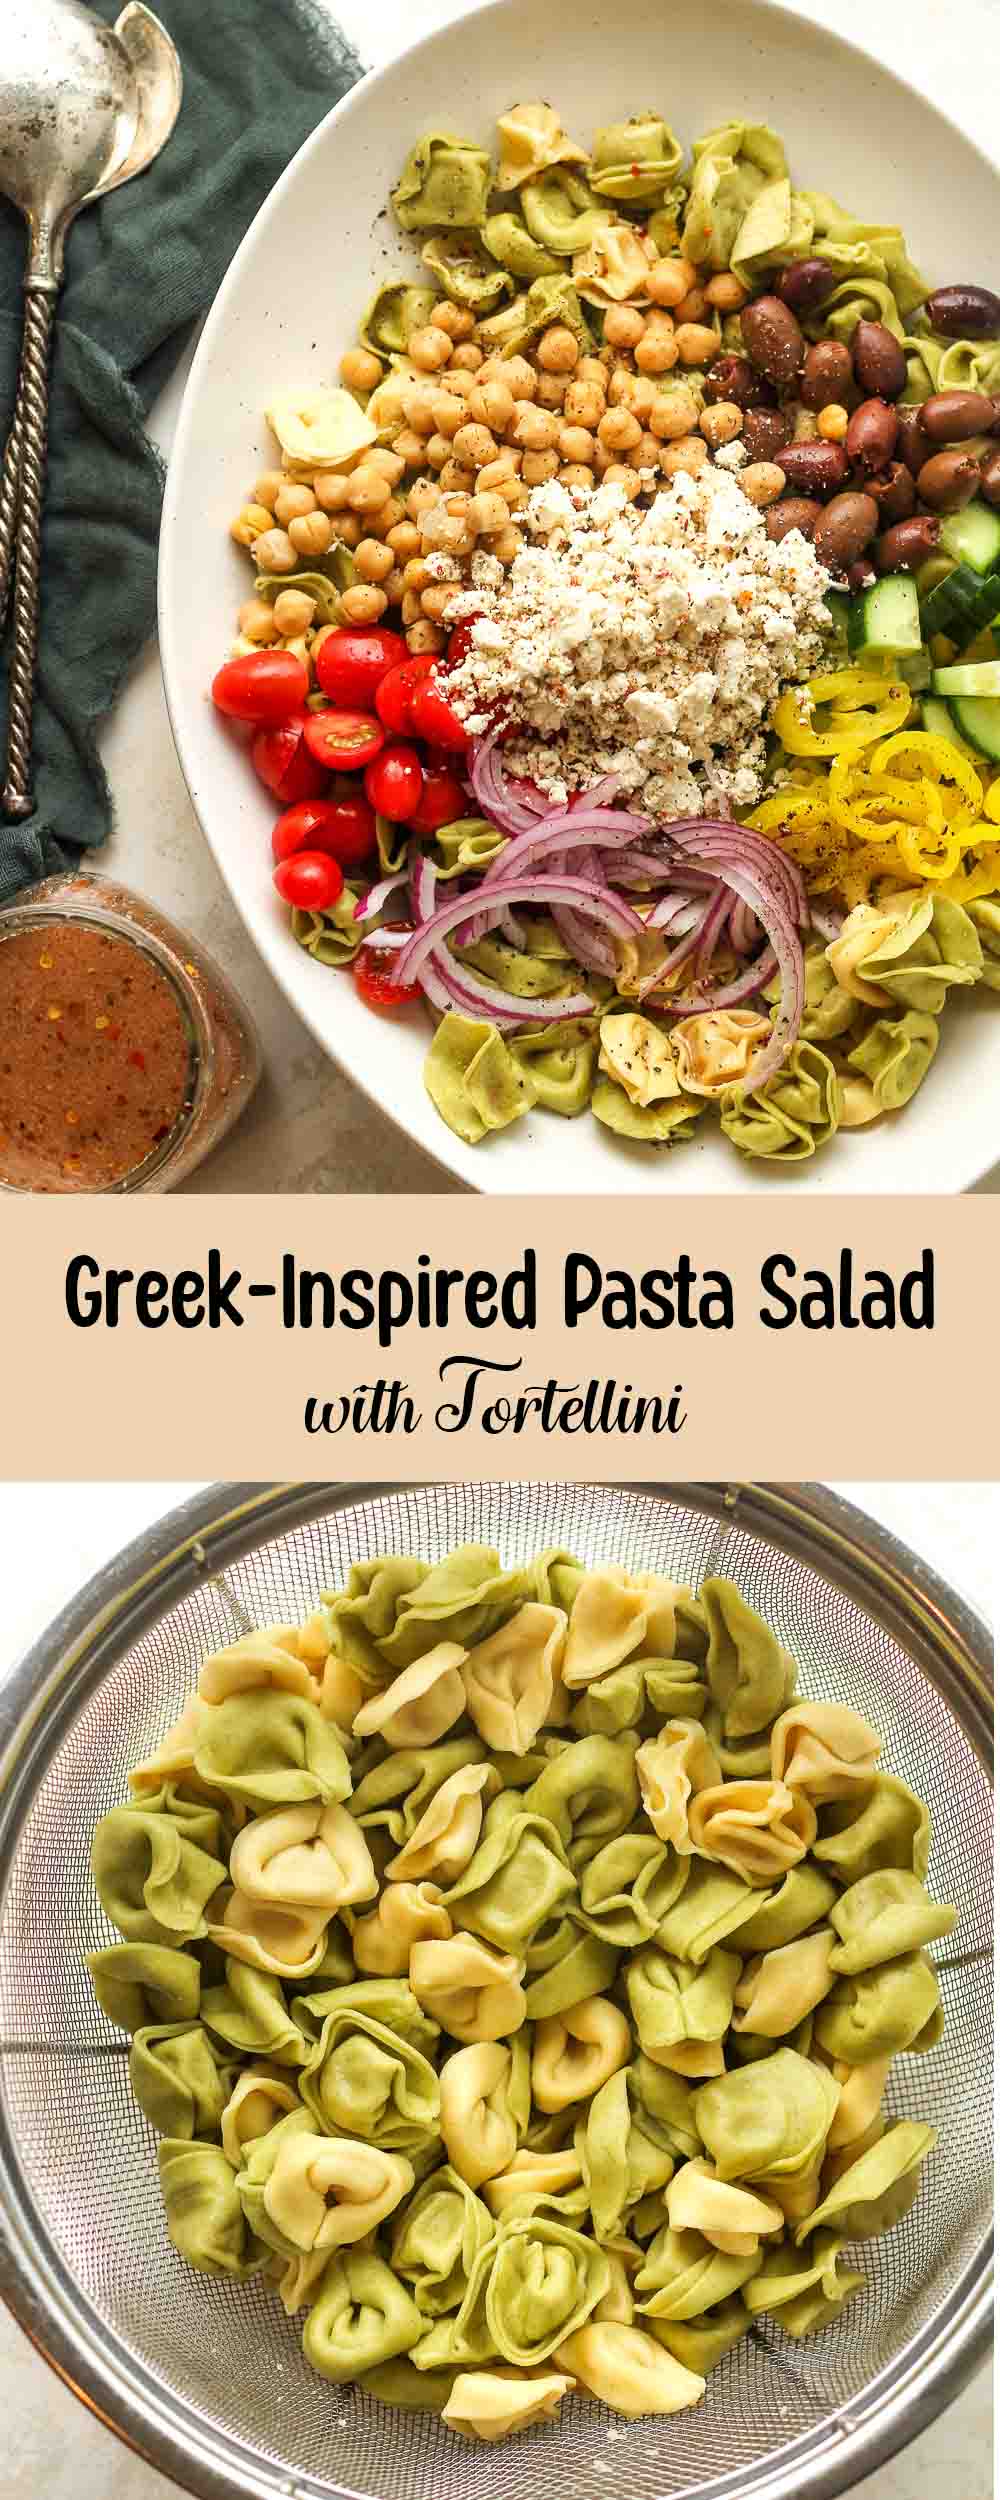 A collage of photos for Greek-Inspired Pasta Salad with Tortellini.